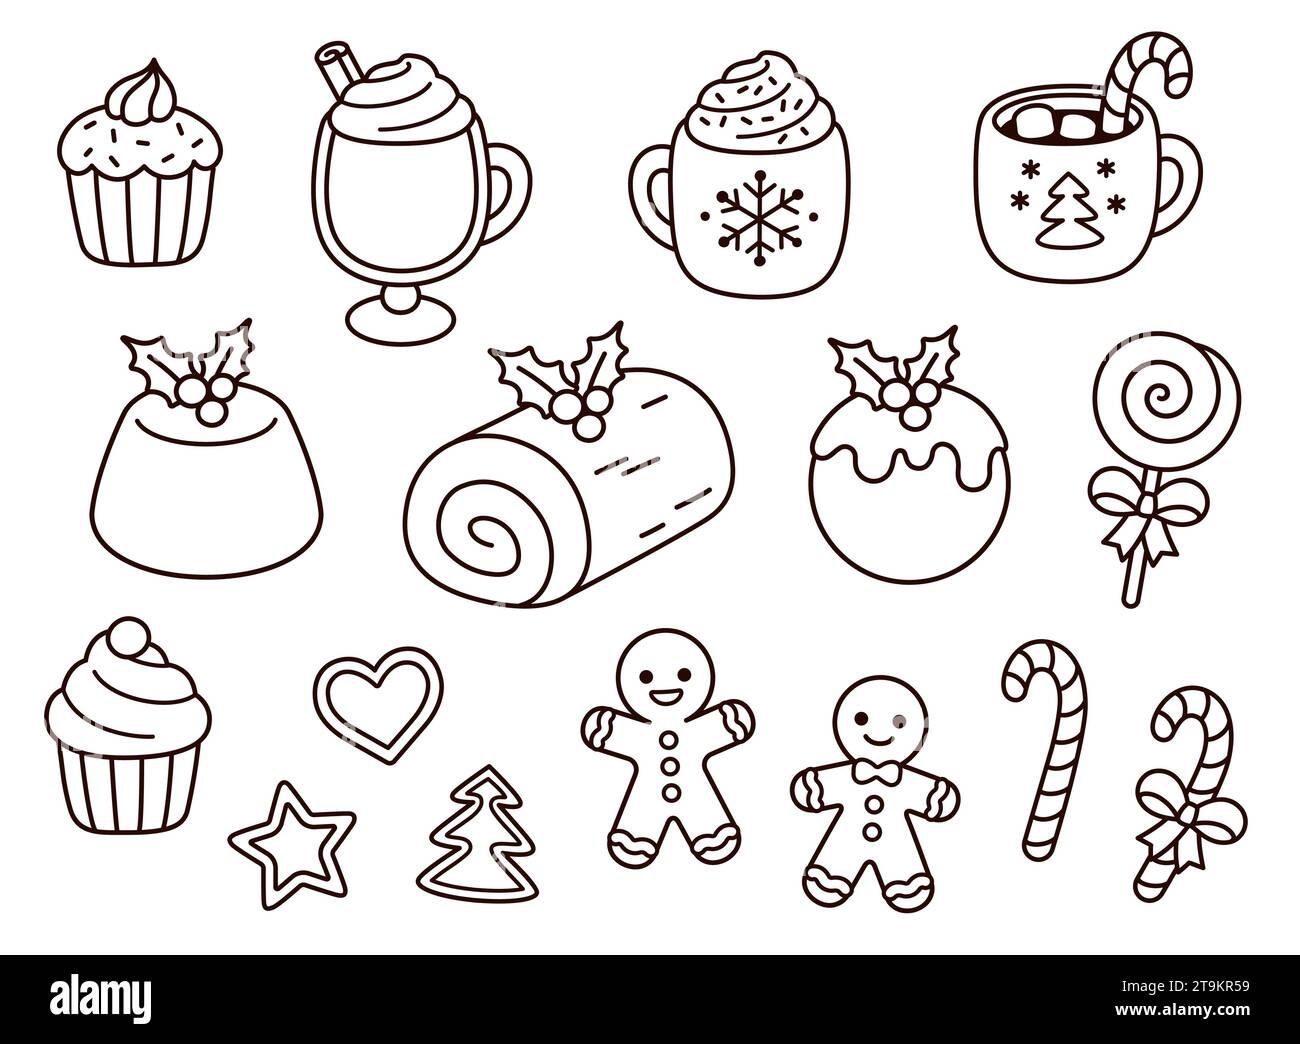 Traditional Christmas food: desserts, drinks, cookies and sweets. Hand drawn doodles, black and white line art. Cute cartoon vector illustration set. Stock Vector